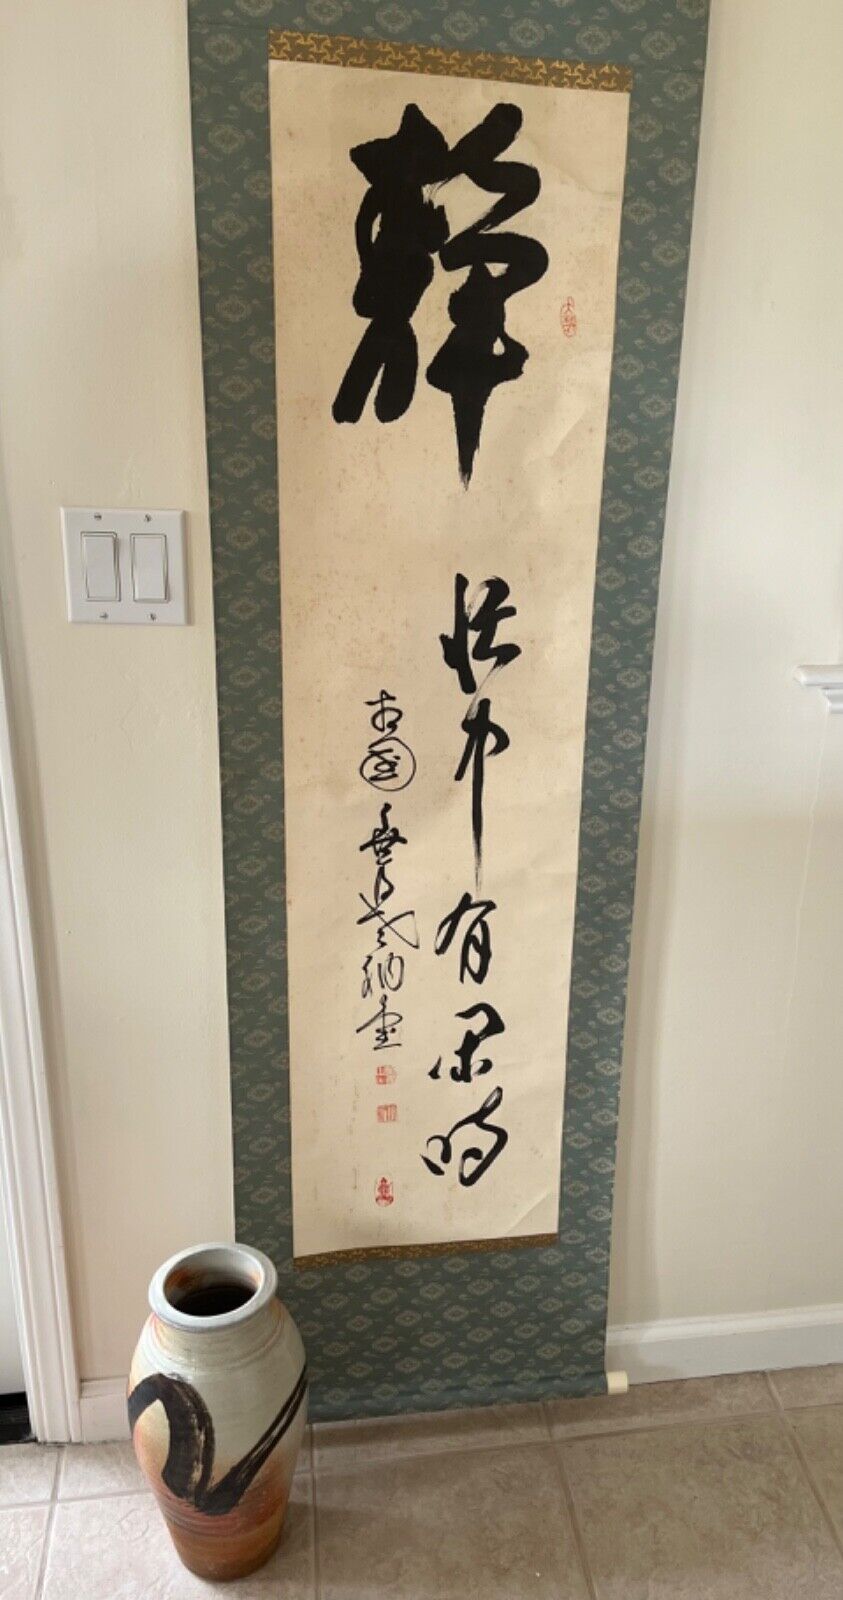 Zen Calligraphy by the Buddhist Priest “Daiyoku” Antique Stamped & Signed w/ Box